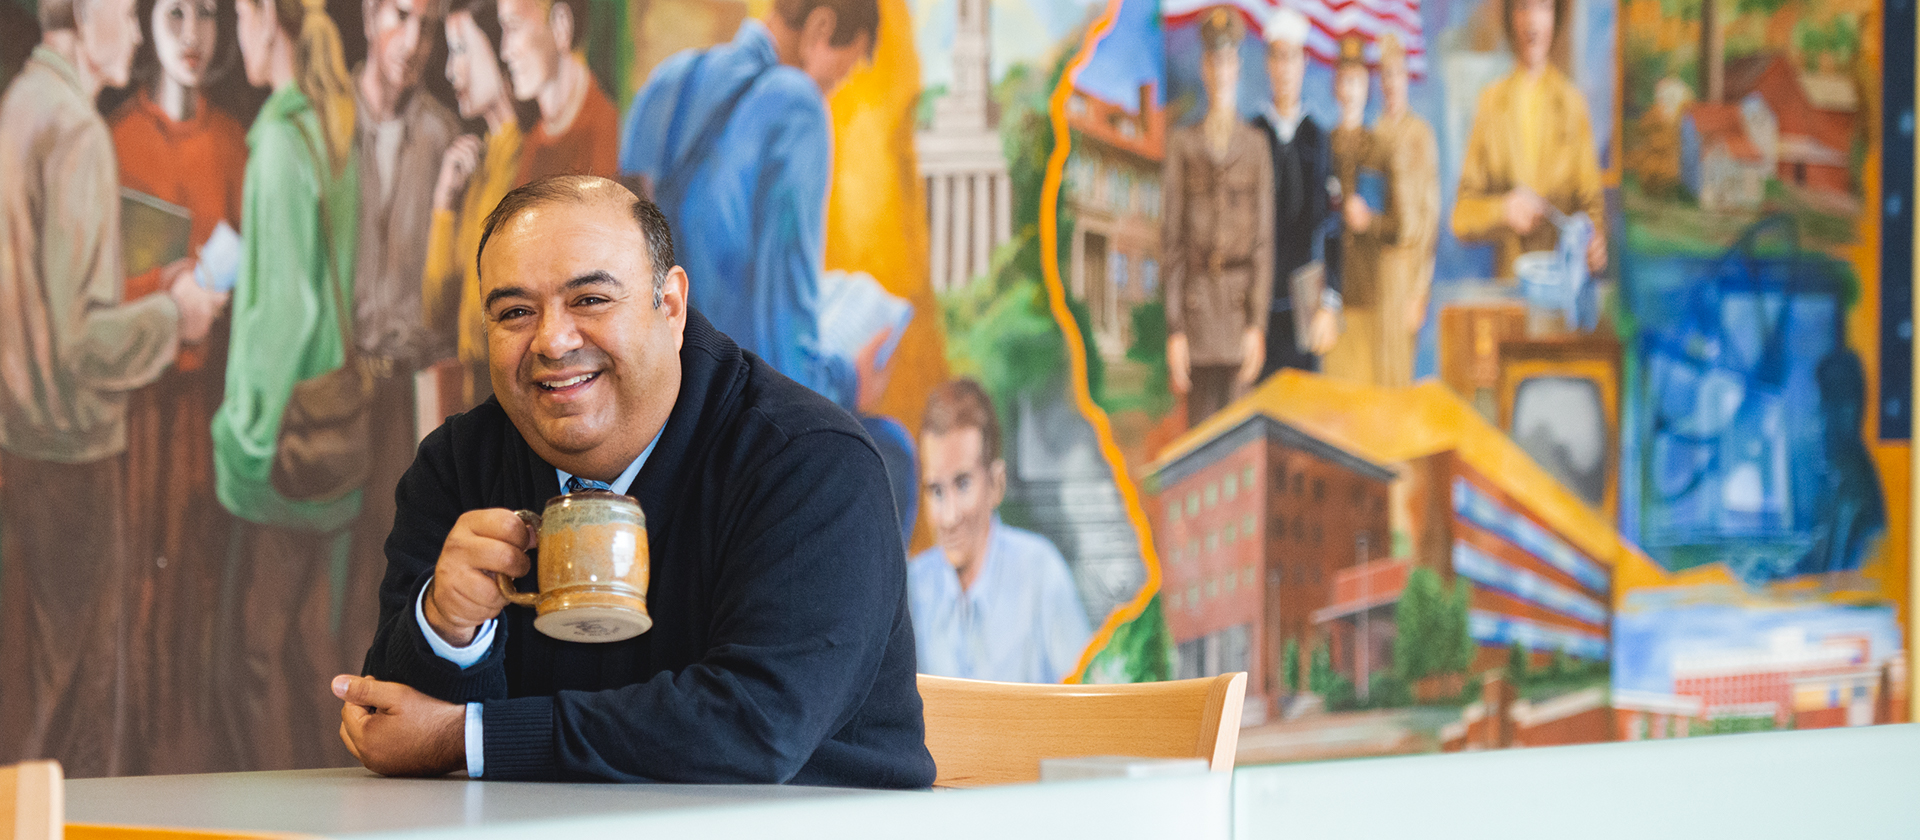 Smiling man holding coffee cup while sitting in front of colorful mural